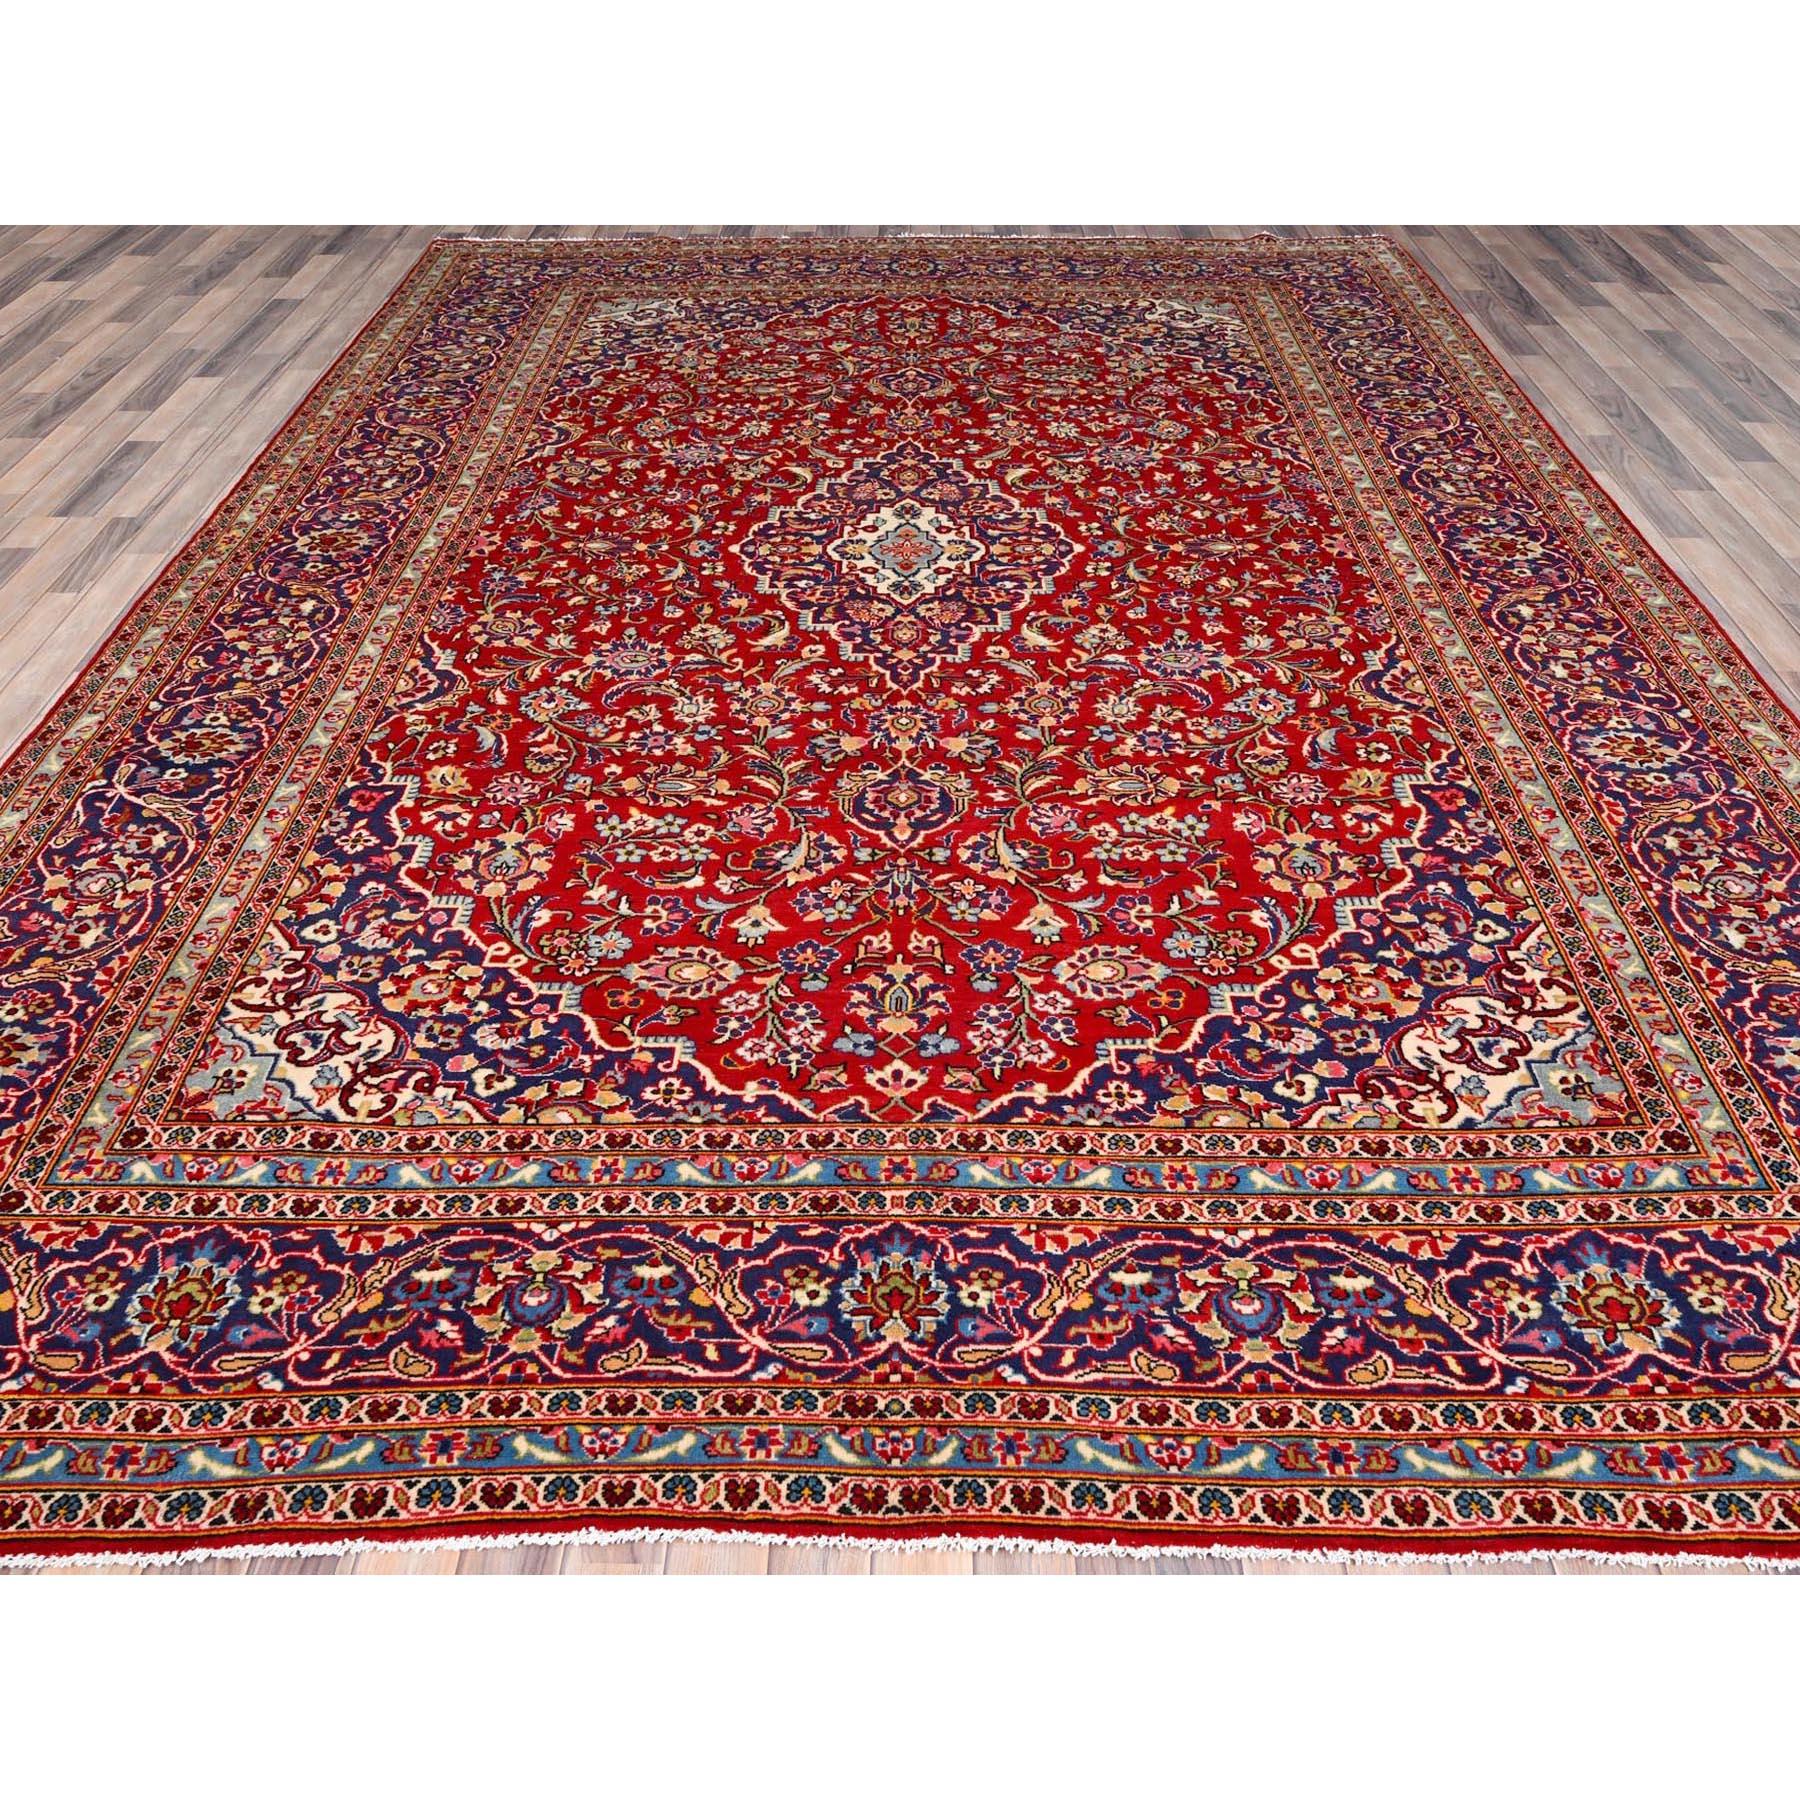 Medieval Red Clean Soft Vintage Persian Kashan Full Pile Hand Knotted Organic Wool Rug